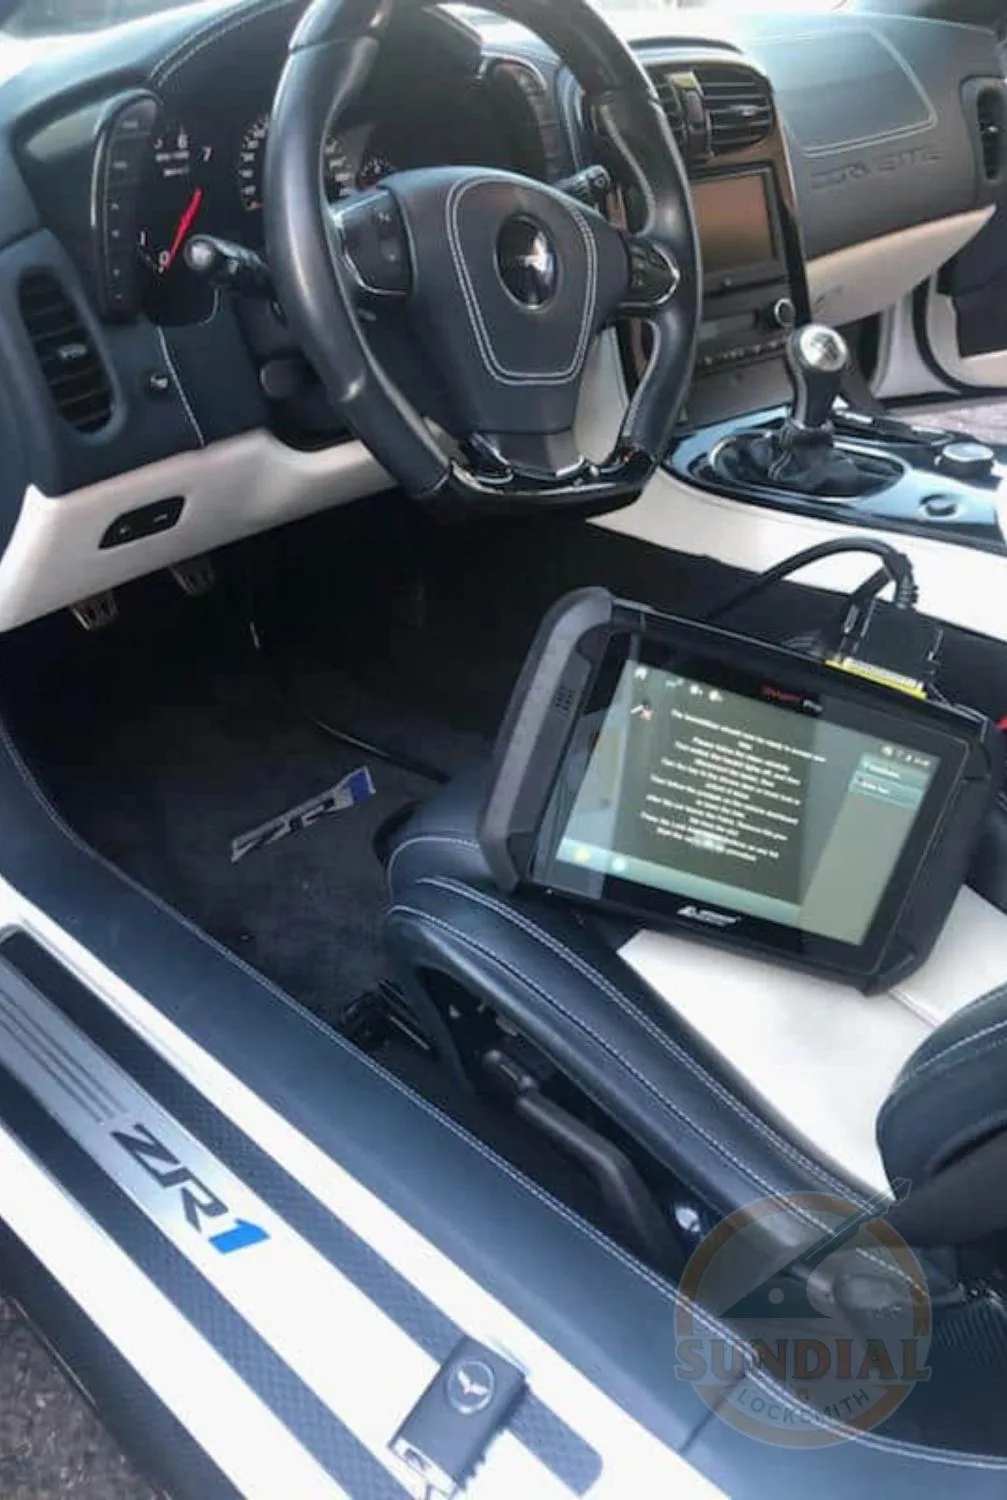 Automotive diagnostic tablet on a sportscar's seat, displaying data with the car's interior and steering wheel in view